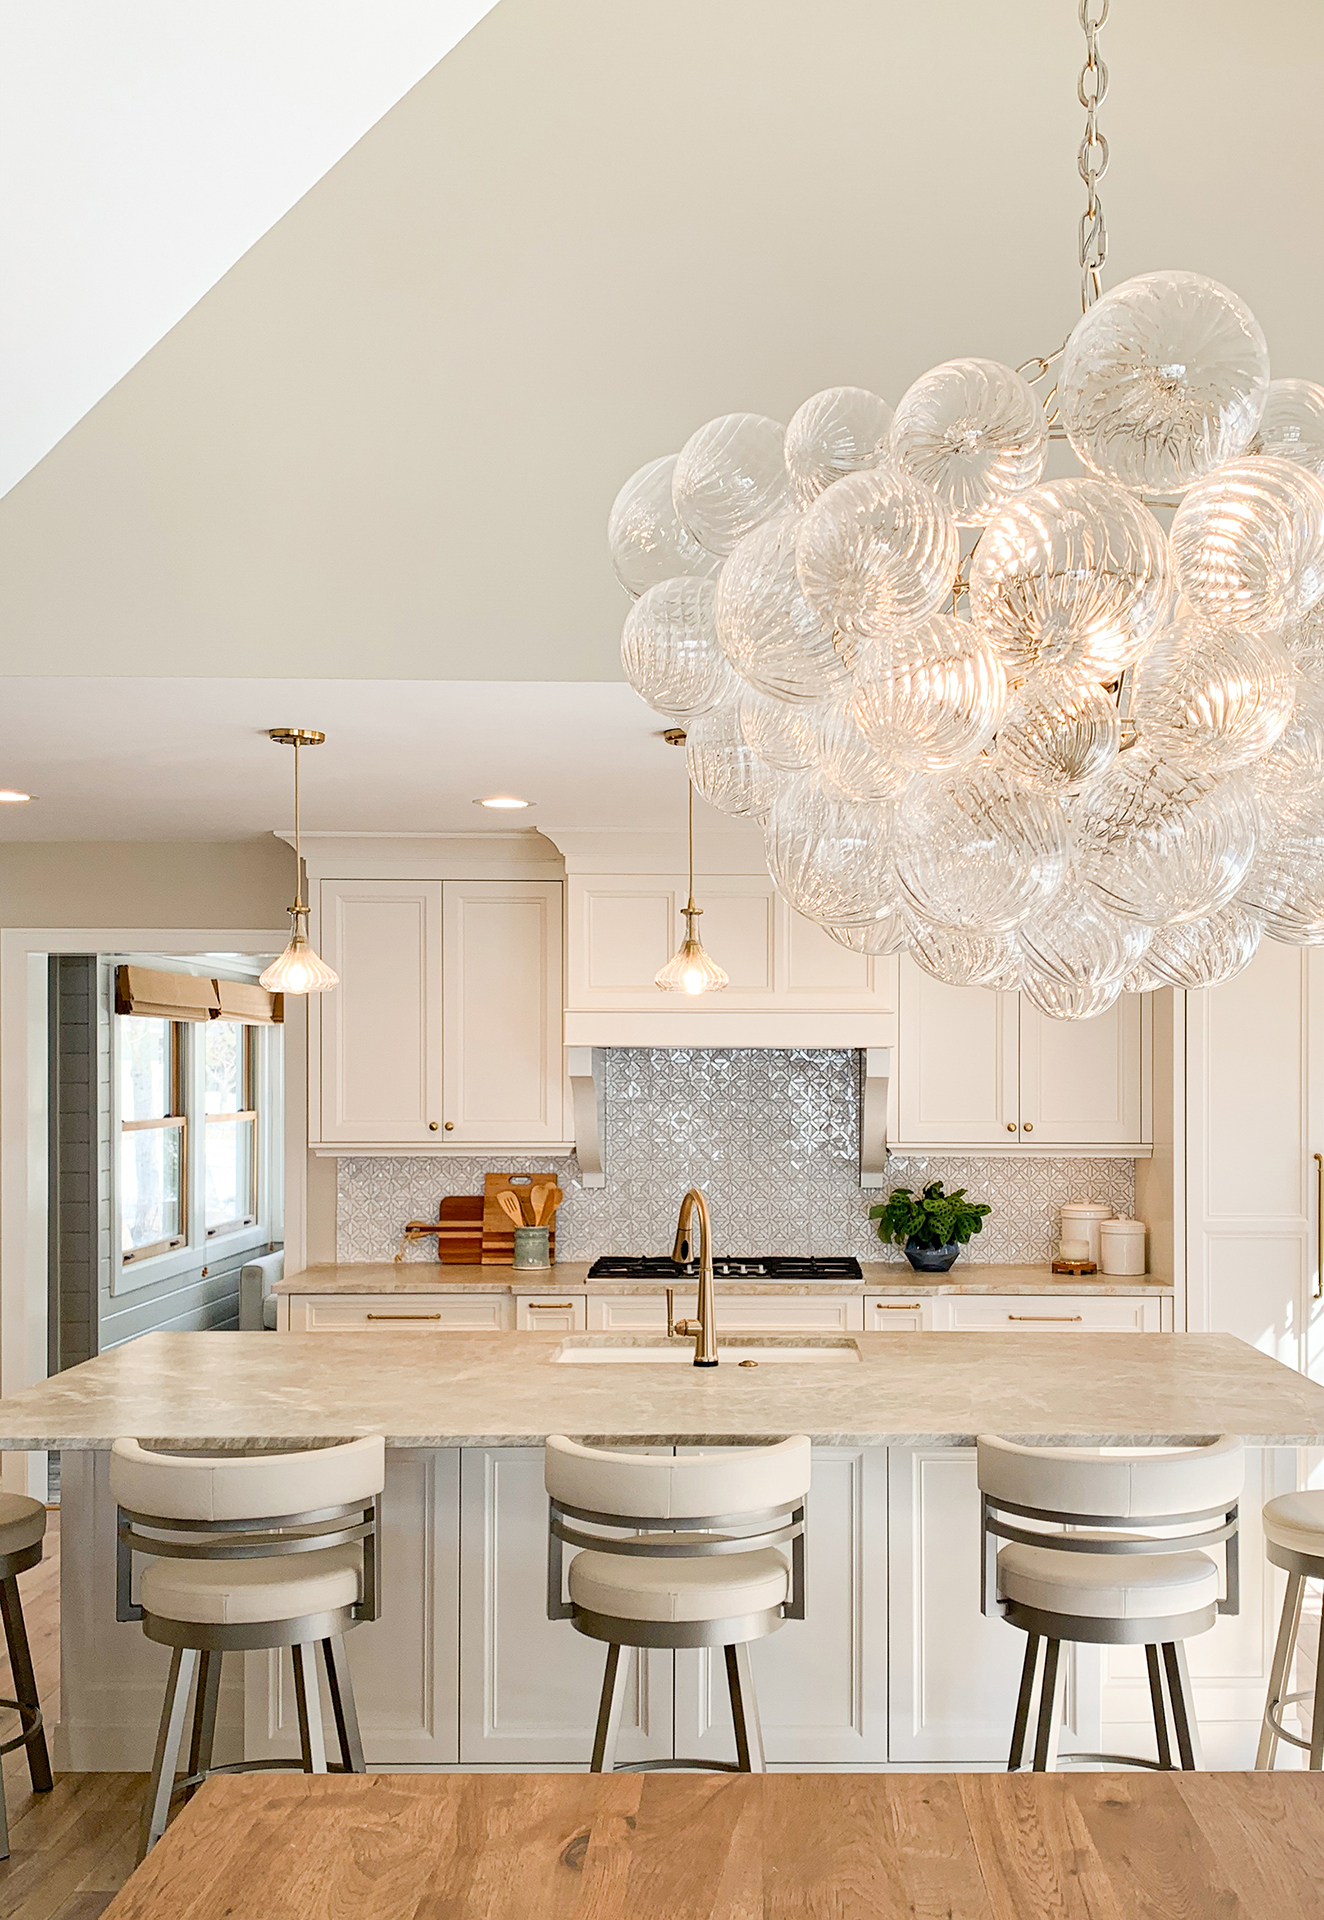 Warm, traditional kitchen with eclectic light fixtures